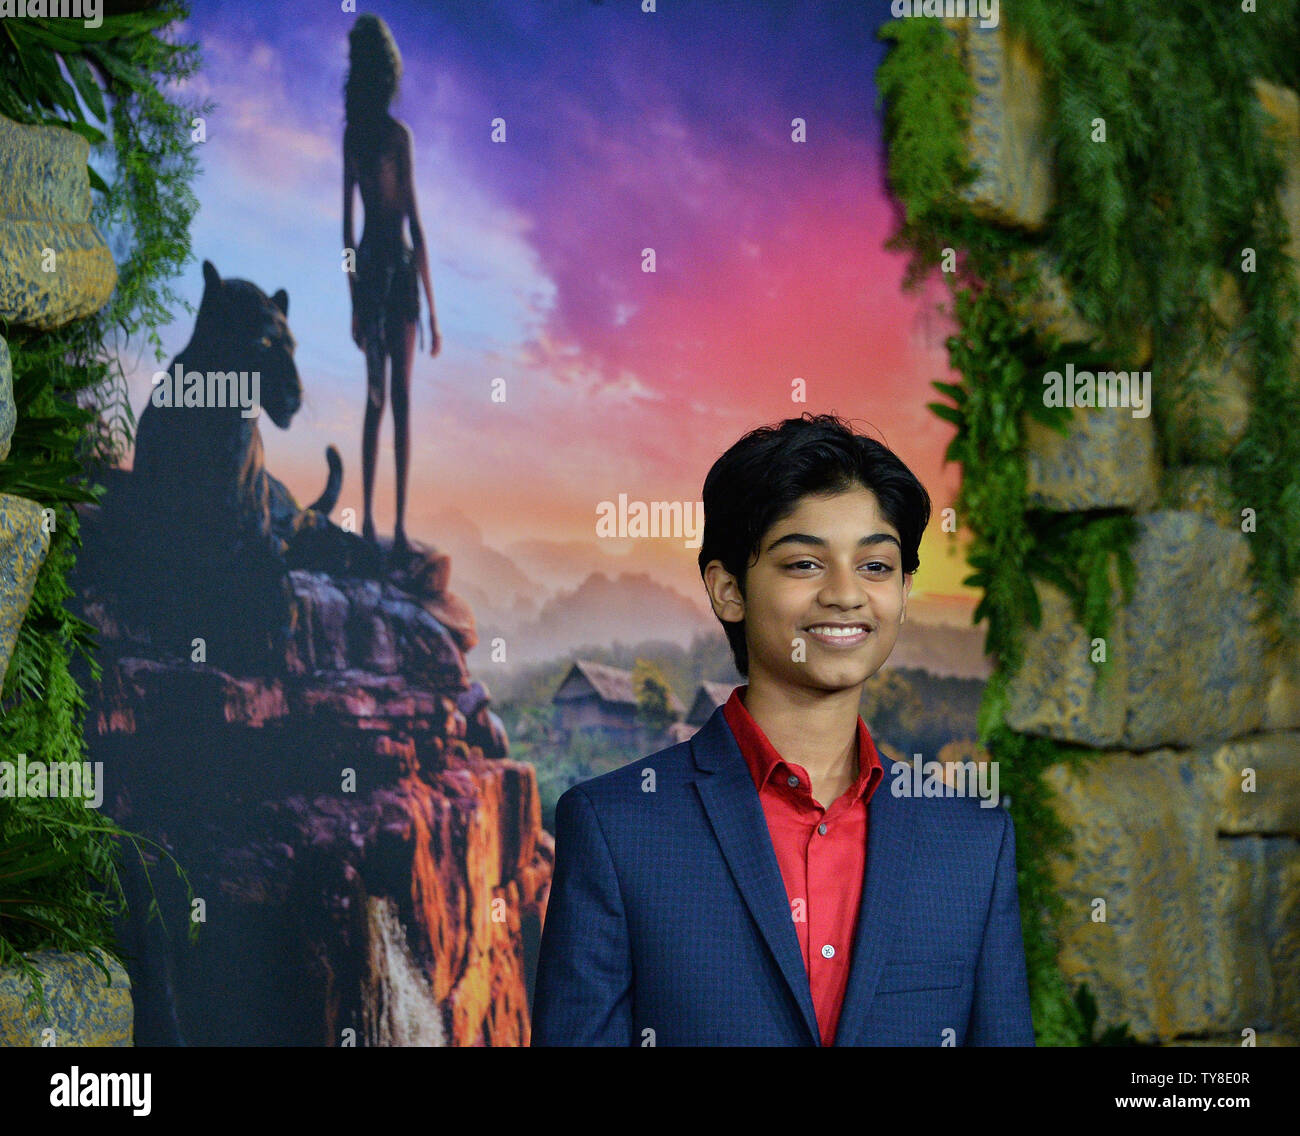 Cast member Rohan Chand attends the premiere of the motion picture drama 'Mowgli: Legend of the Jungle' at the ArcLight Cinema Dome in the Hollywood section of Los Angeles on November 28, 2018. Based on the novel by Rudyard Kipling The story follows the upbringing of the human child Mowgli raised by a pack of wolves in the jungles of India. As he learns the often harsh rules of the jungle, under the tutelage of a bear named Baloo and a black panther named Bagheera, Mowgli becomes accepted by the animals of the jungle as one of their own, except for one; the fearsome tiger Shere Khan. But there Stock Photo